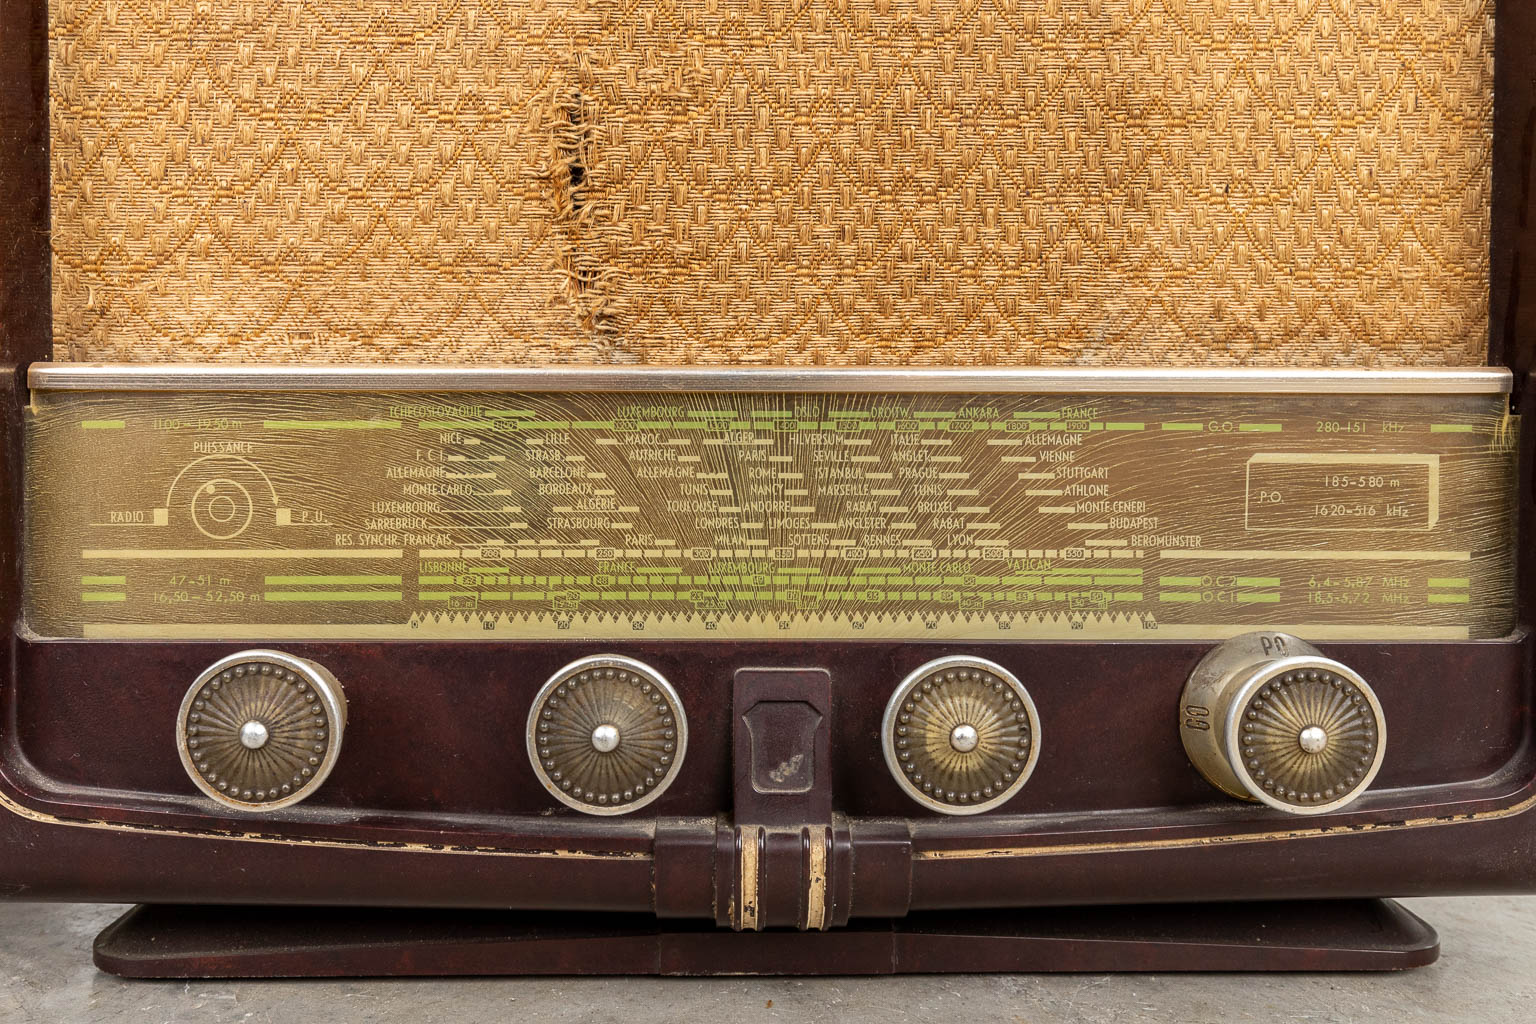 A collection of 2 antique radio